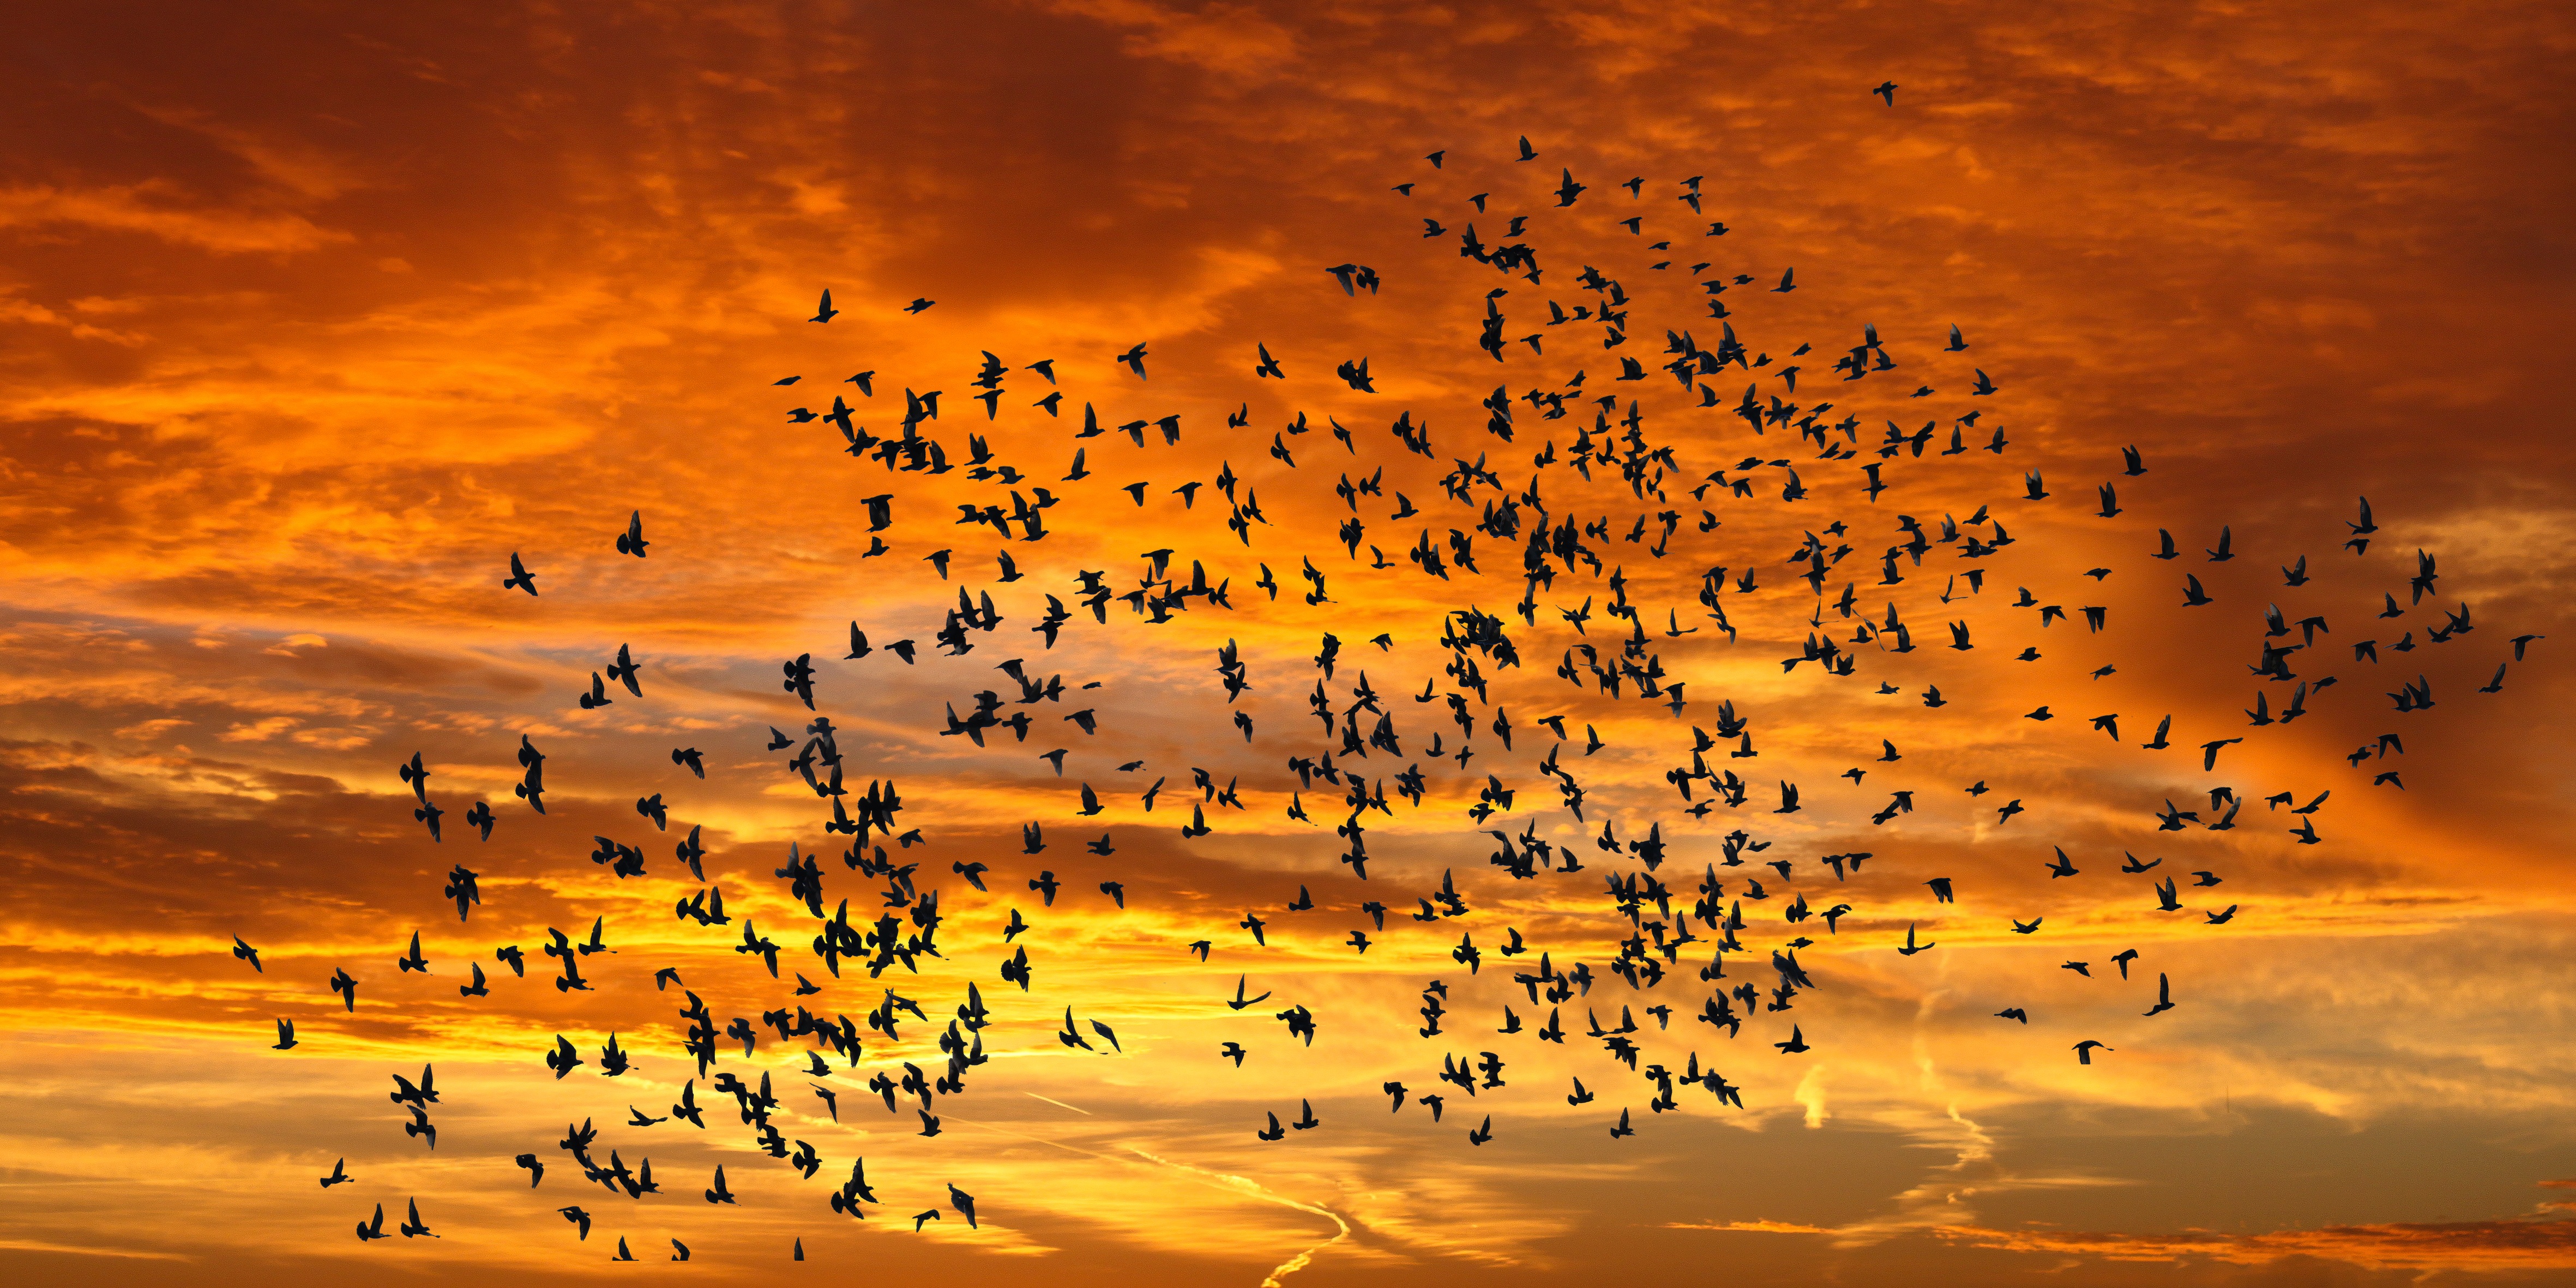 Download PC Wallpaper nature, sunset, birds, sky, clouds, silhouettes, flight